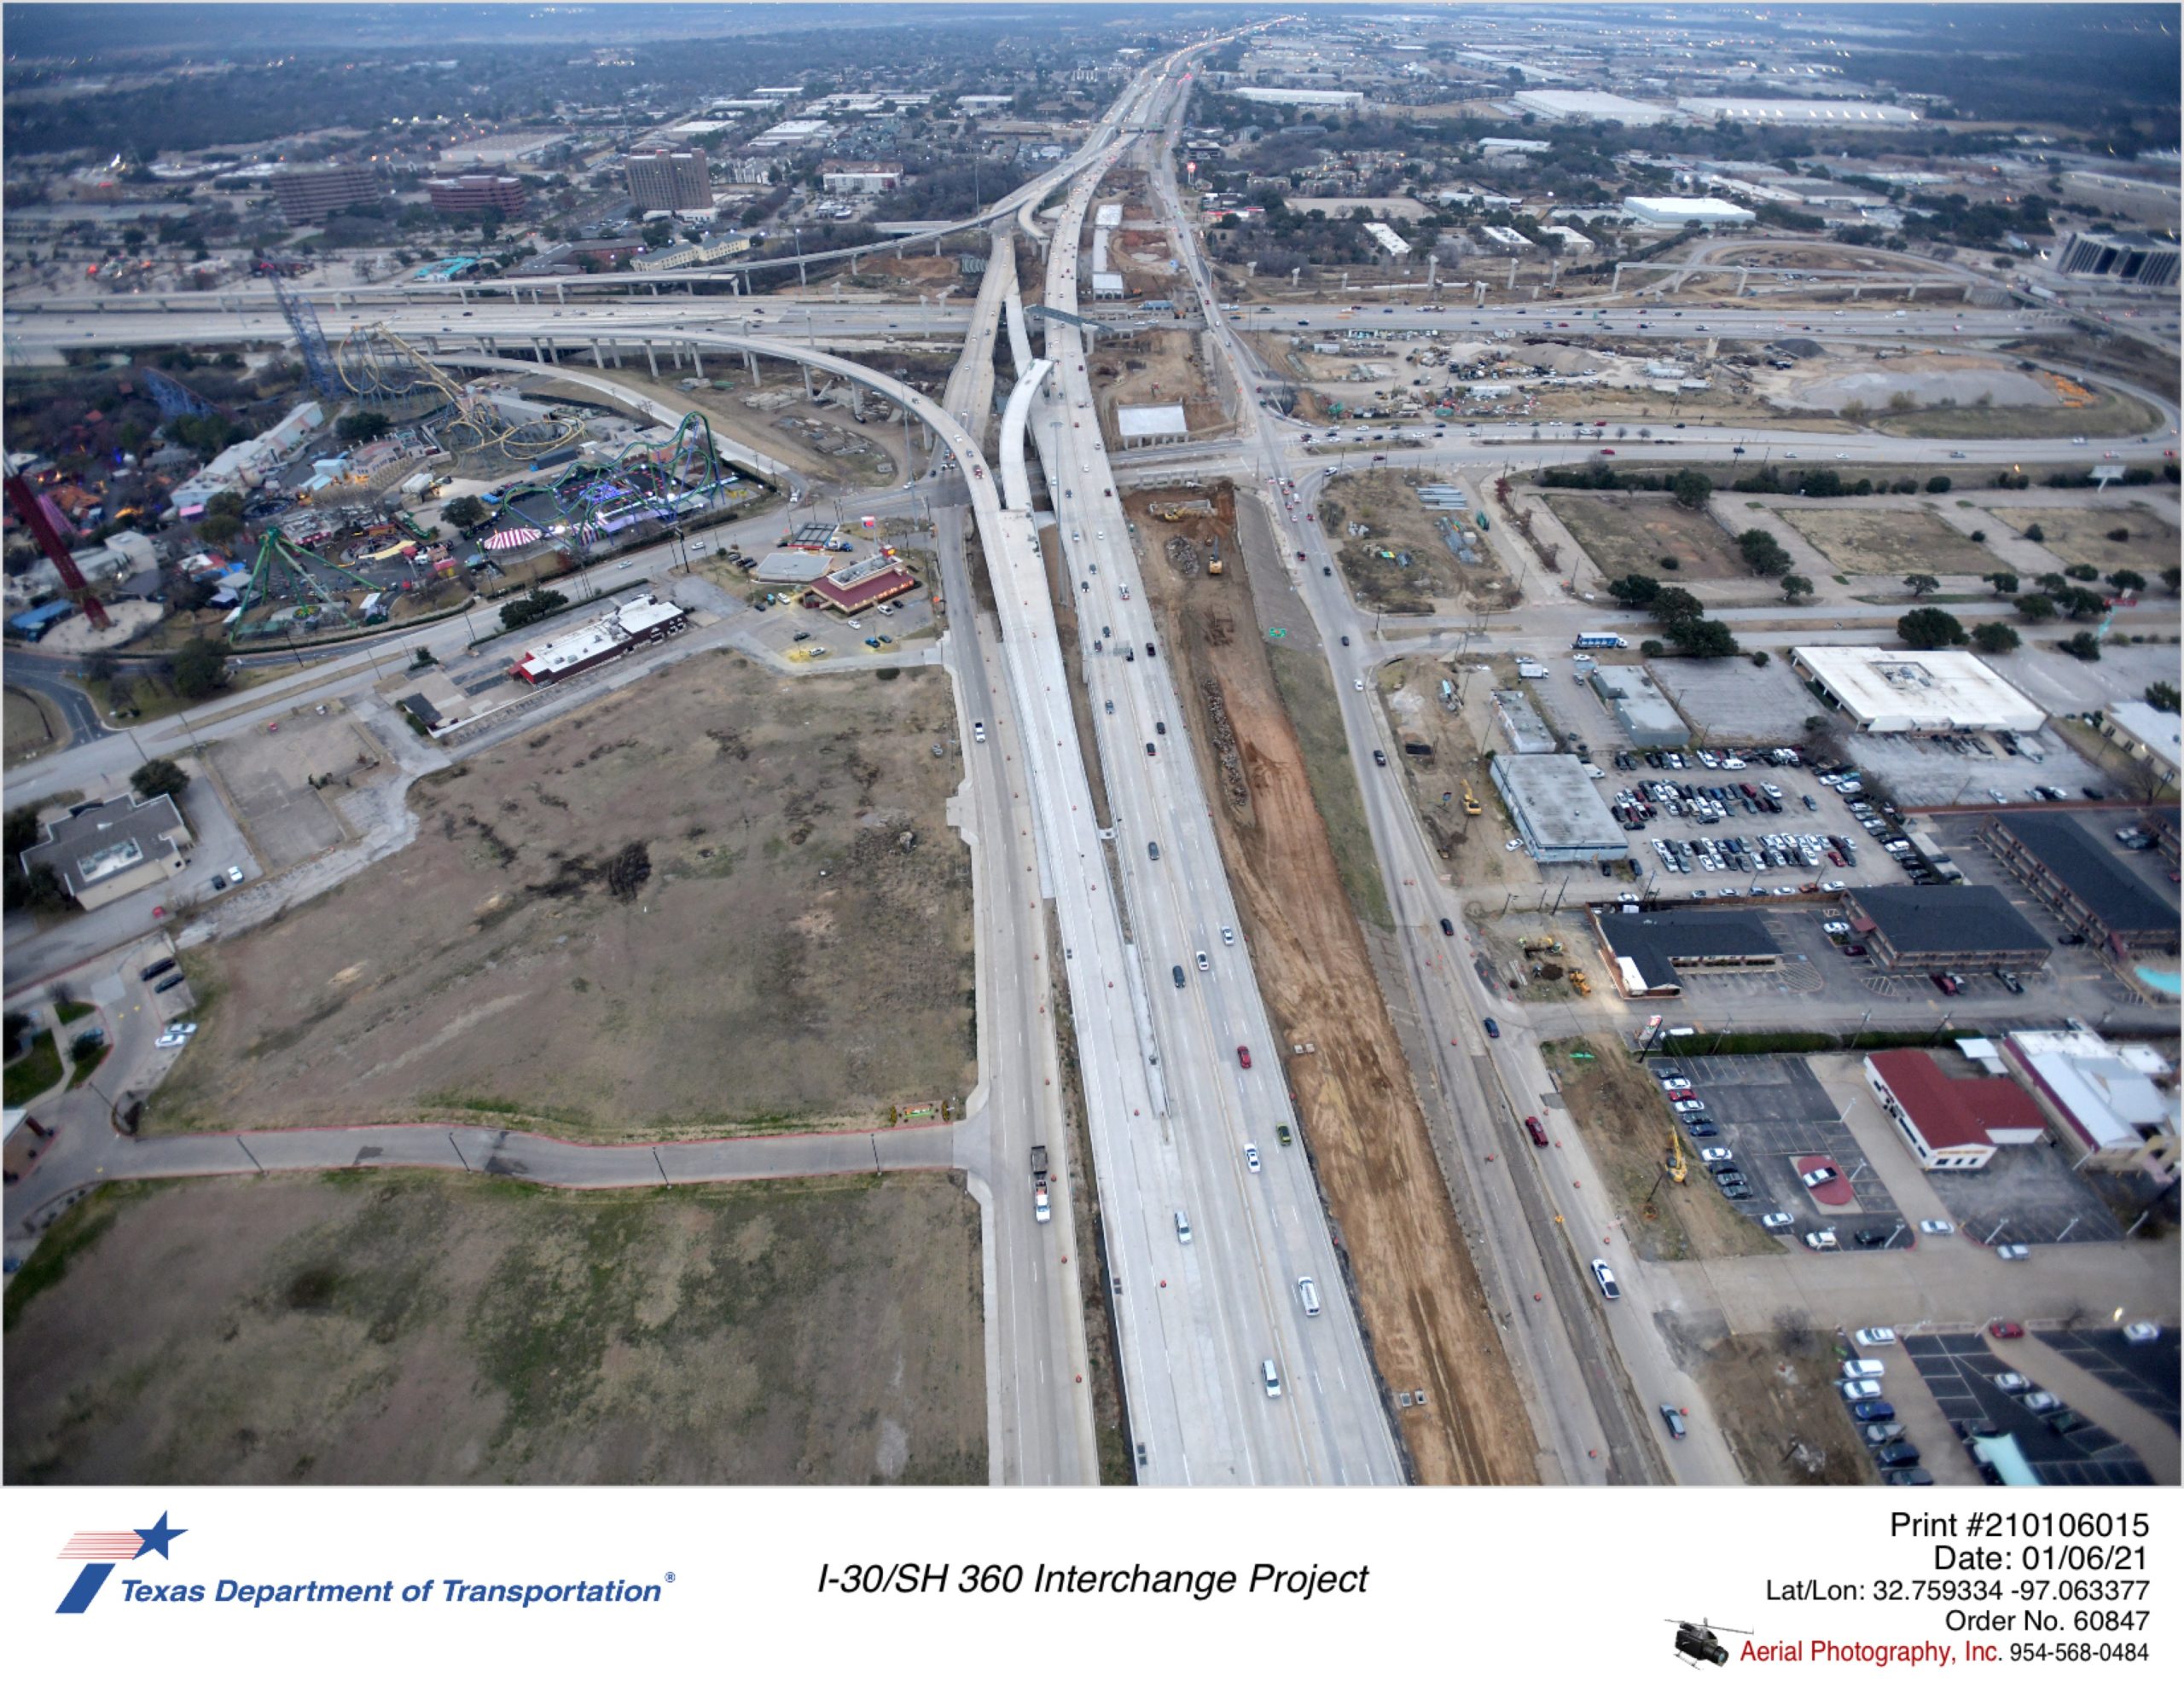 Over SH 360 looking north with I-30 interchange in background. SH 360 mainlane traffic shown on west side of alignment with large open space for new northbound mainlane construction.